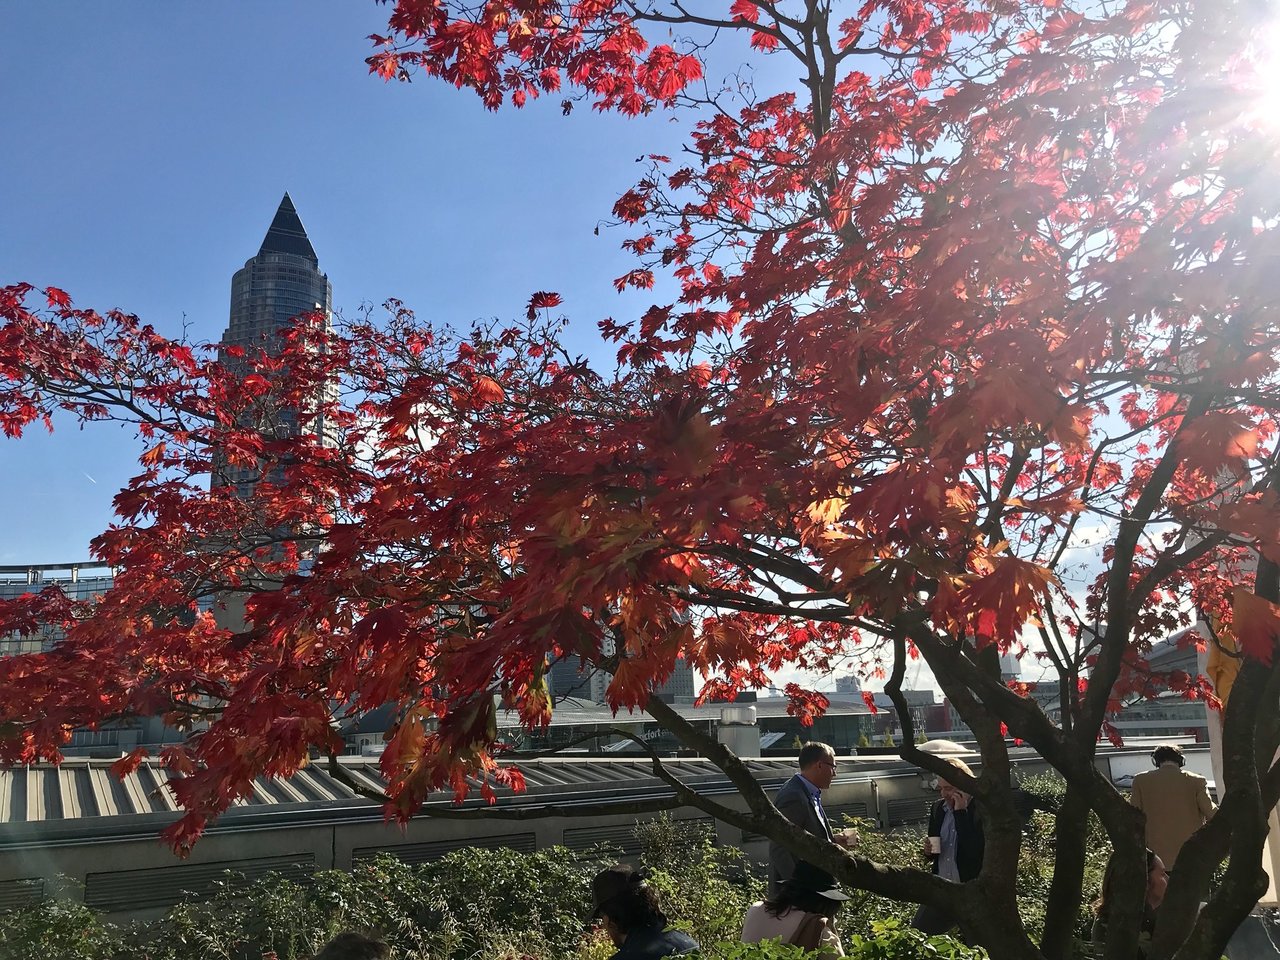 In 30 years of Frankfurt book fairs, I’ve never known such good weather! #fbm17 #fbf17 https://t.co/25ykj7DPq8